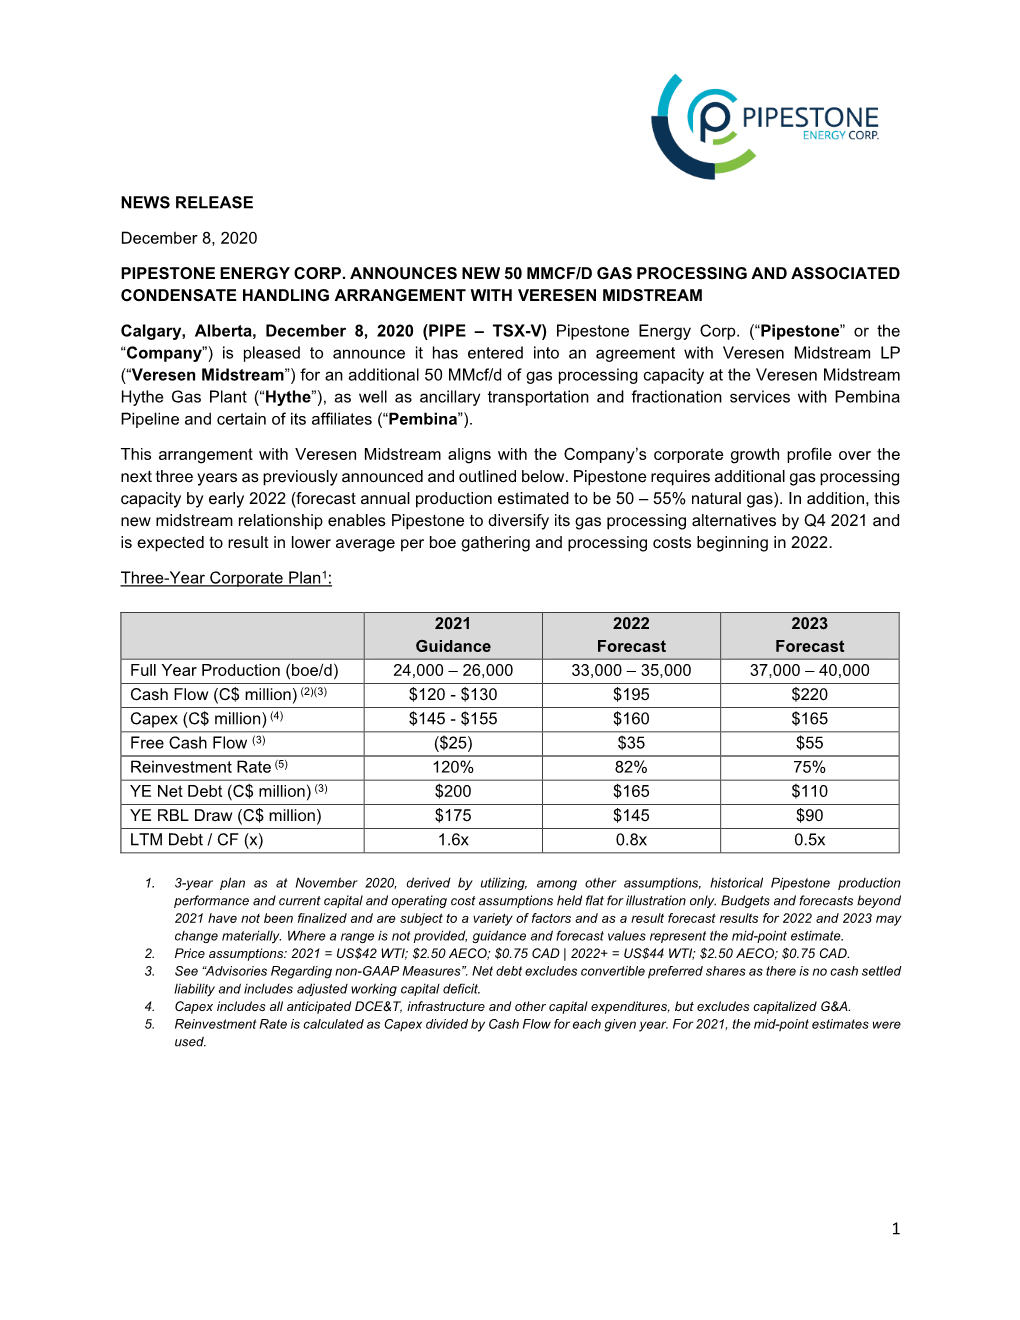 NEWS RELEASE December 8, 2020 PIPESTONE ENERGY CORP. ANNOUNCES NEW 50 MMCF/D GAS PROCESSING and ASSOCIATED CONDENSATE HANDLING A